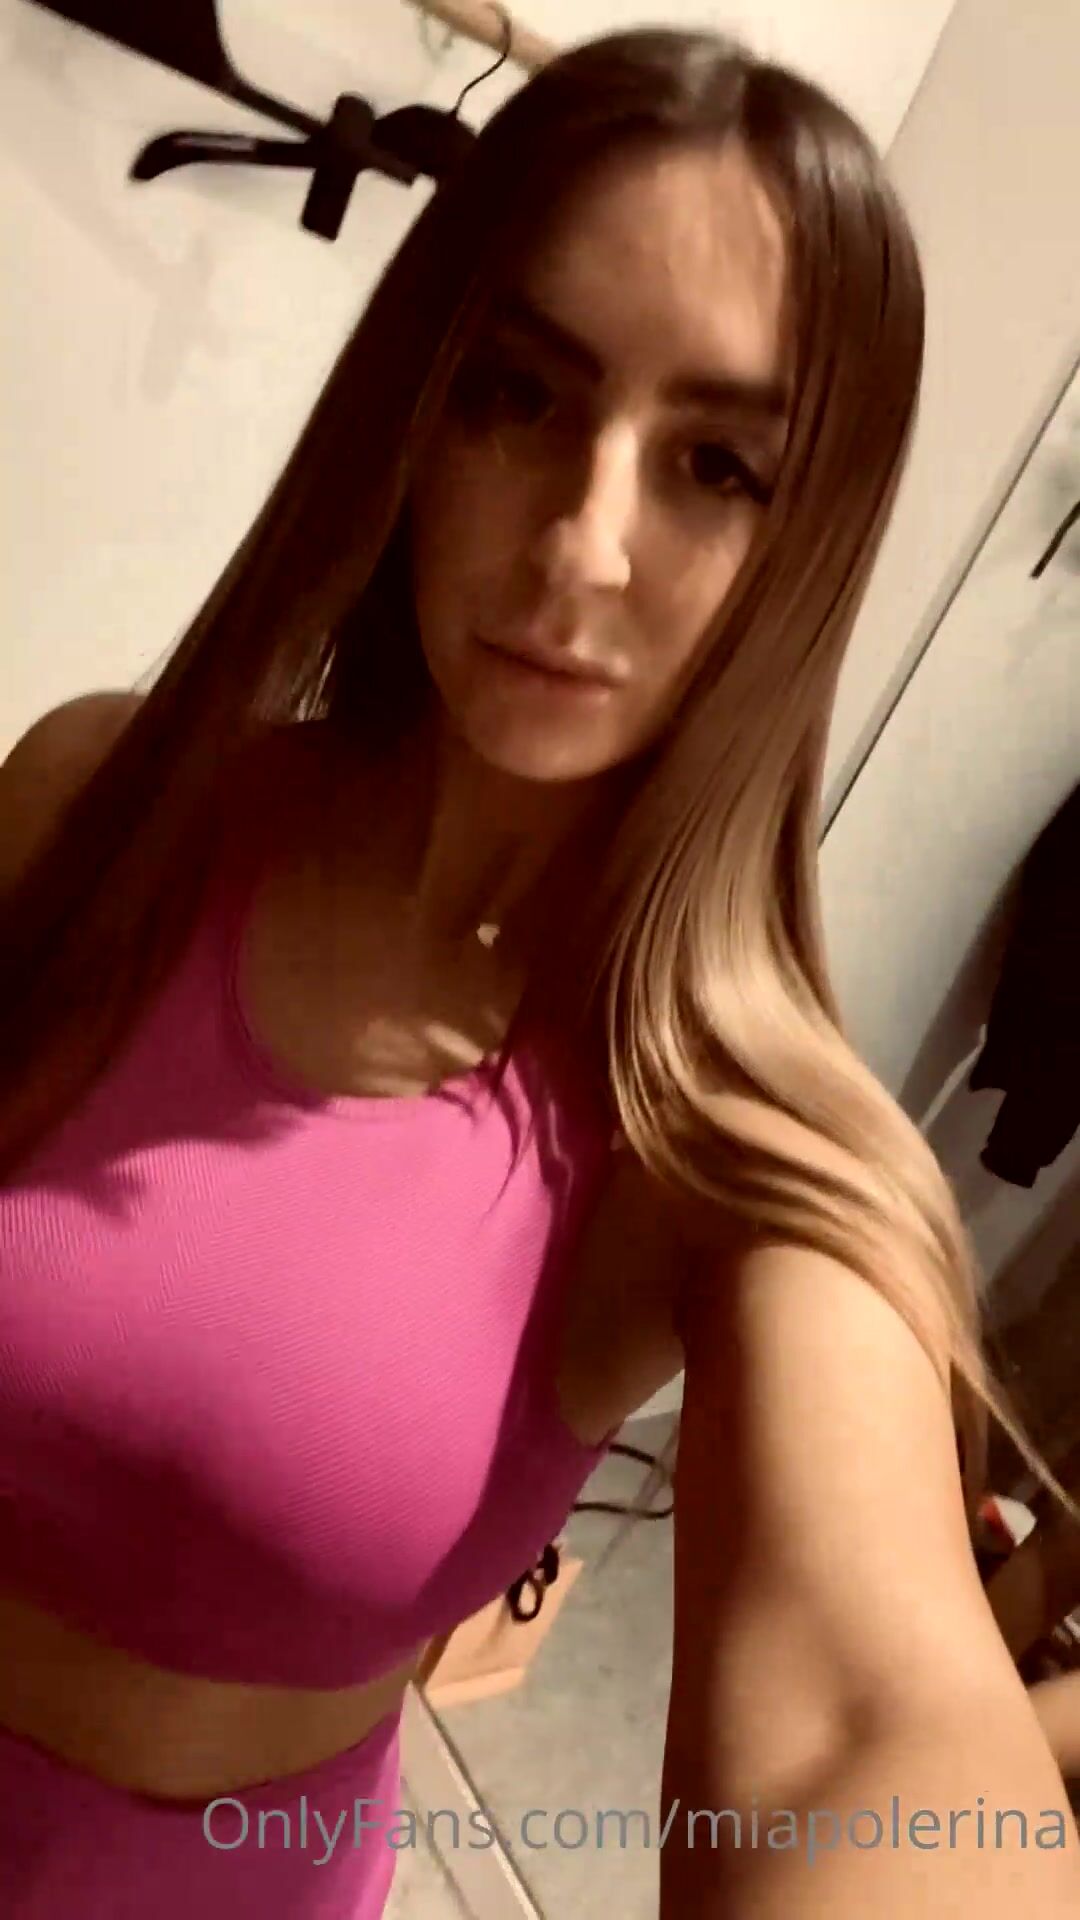 vitaminmia as highly requested onlyfans porn